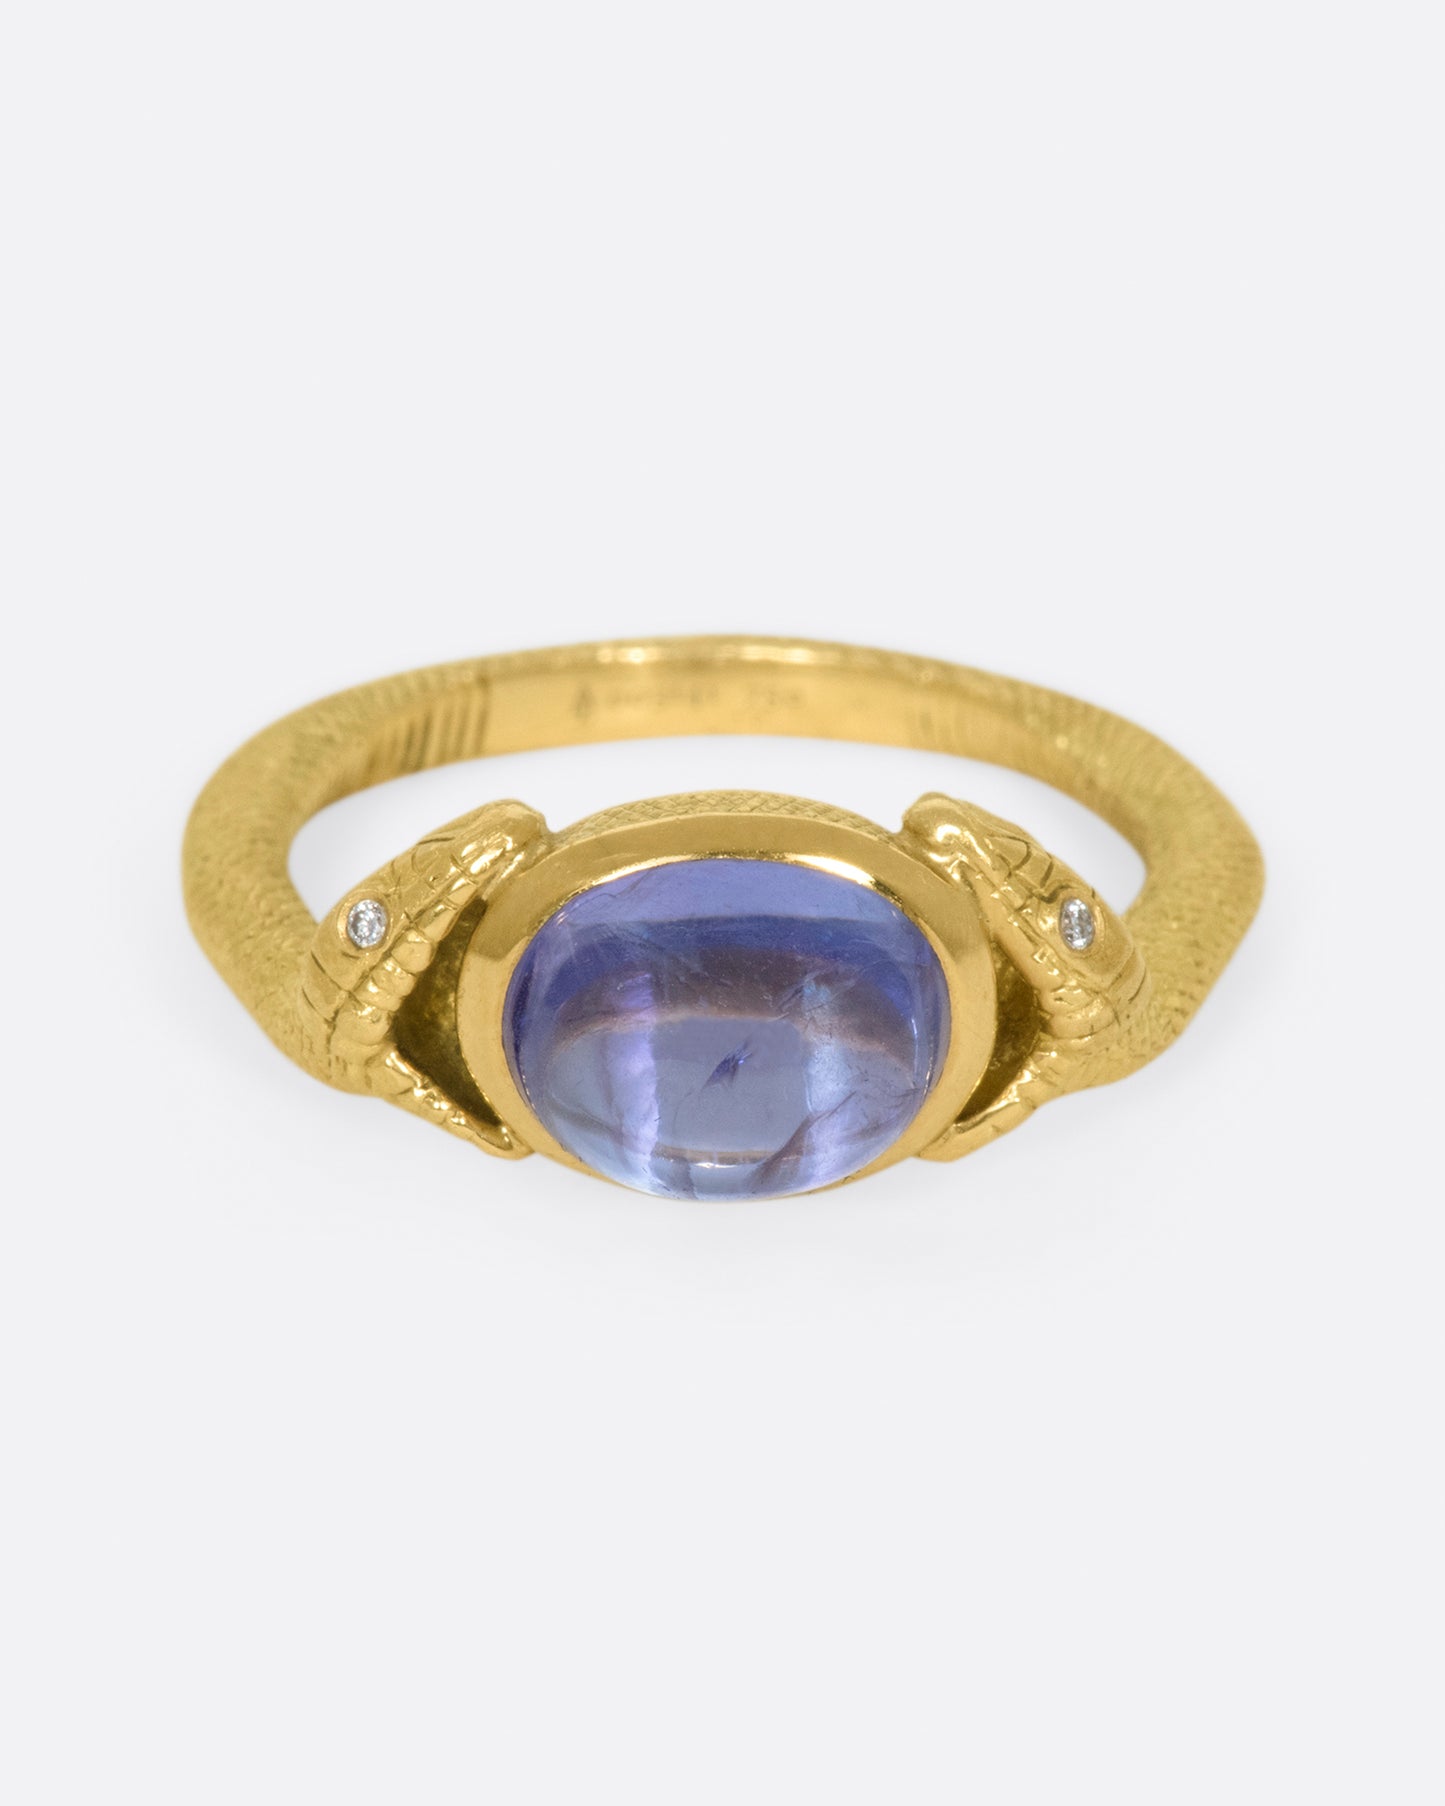 On the one hand, snakes represent Biblical personifications of evil, and on the other they symbolize health and healing; this pair encompass a saturated tanzanite cabochon.